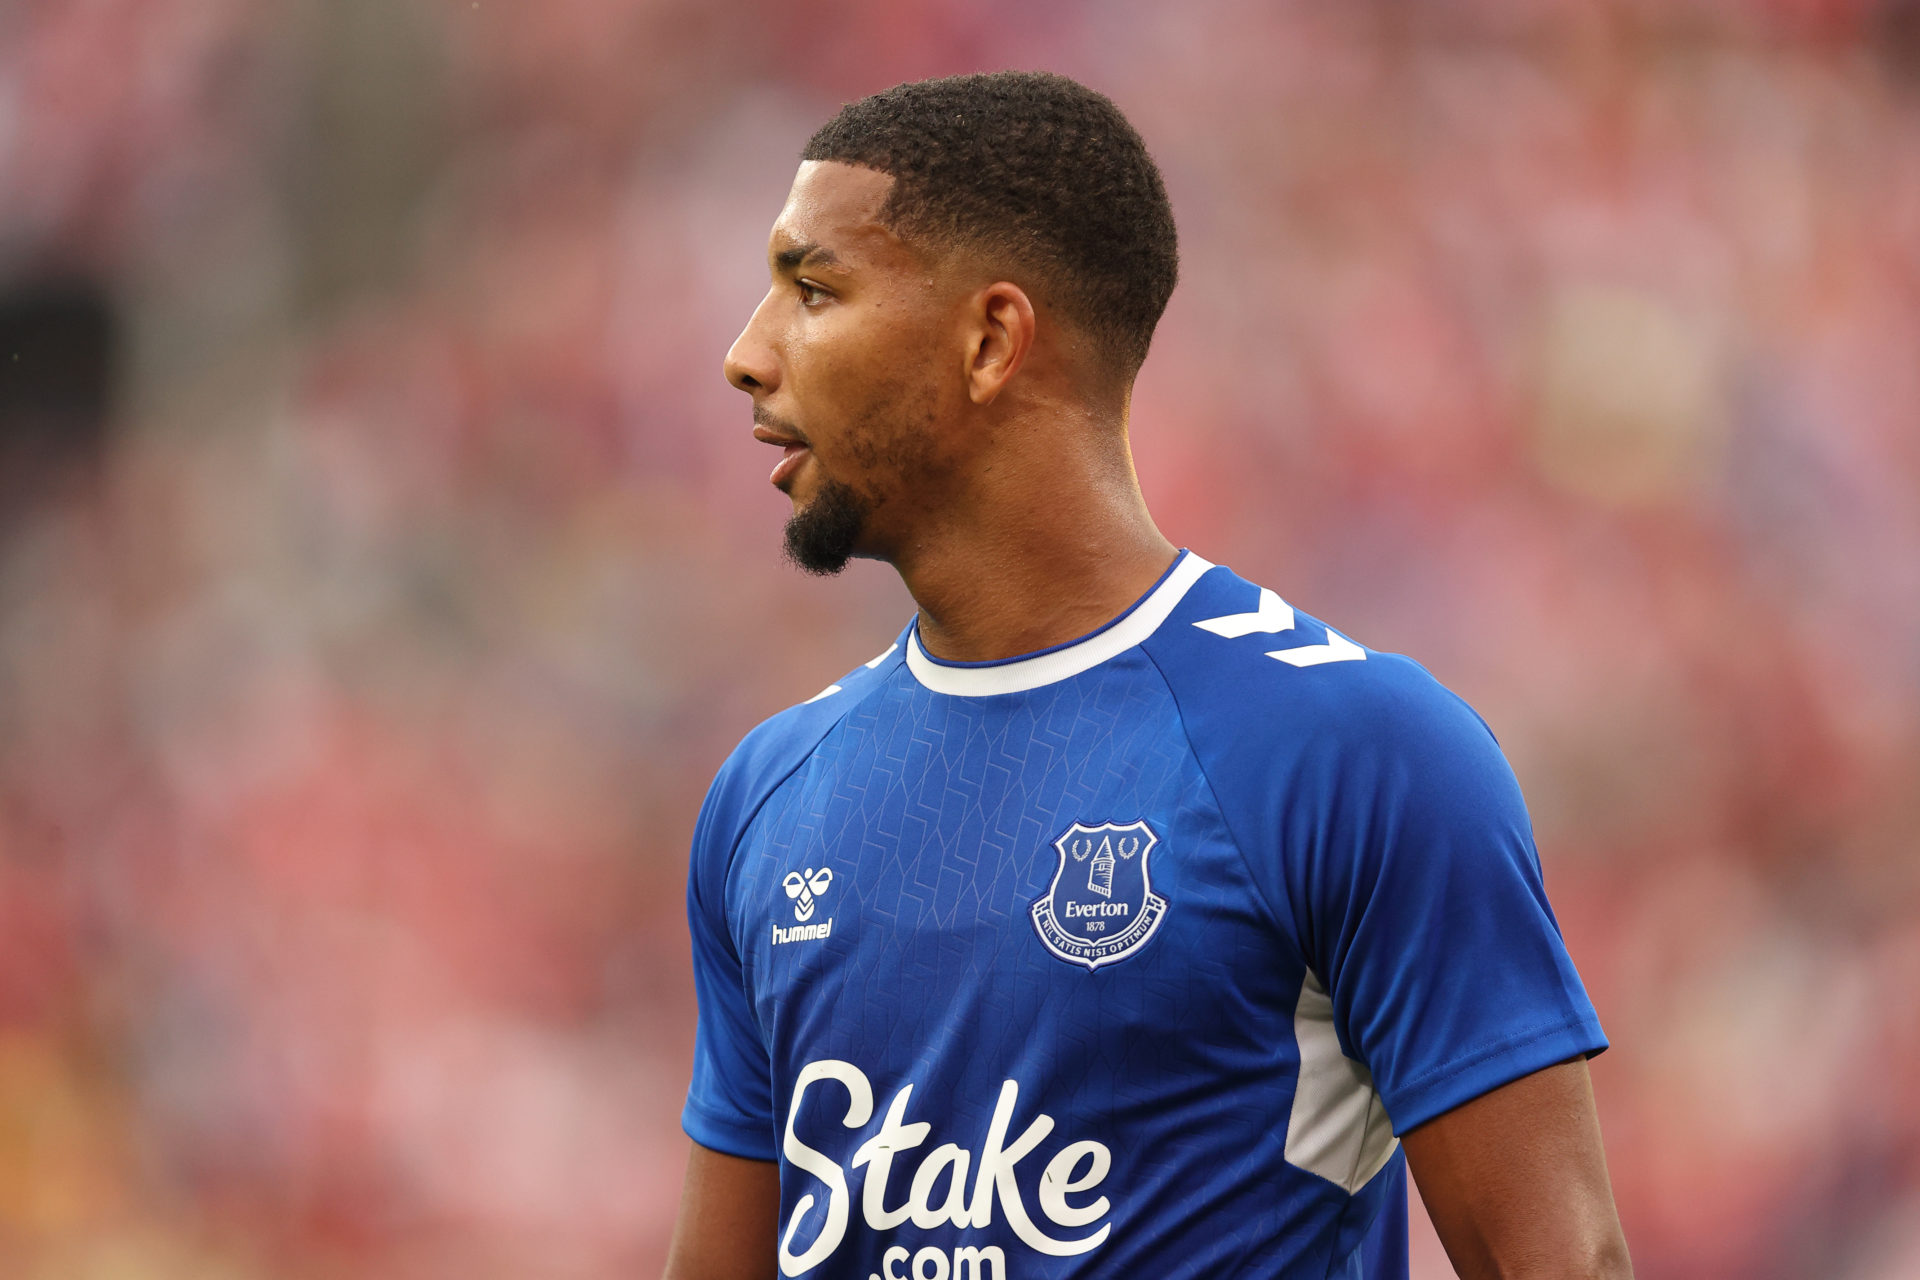 West Ham made contact over Holgate